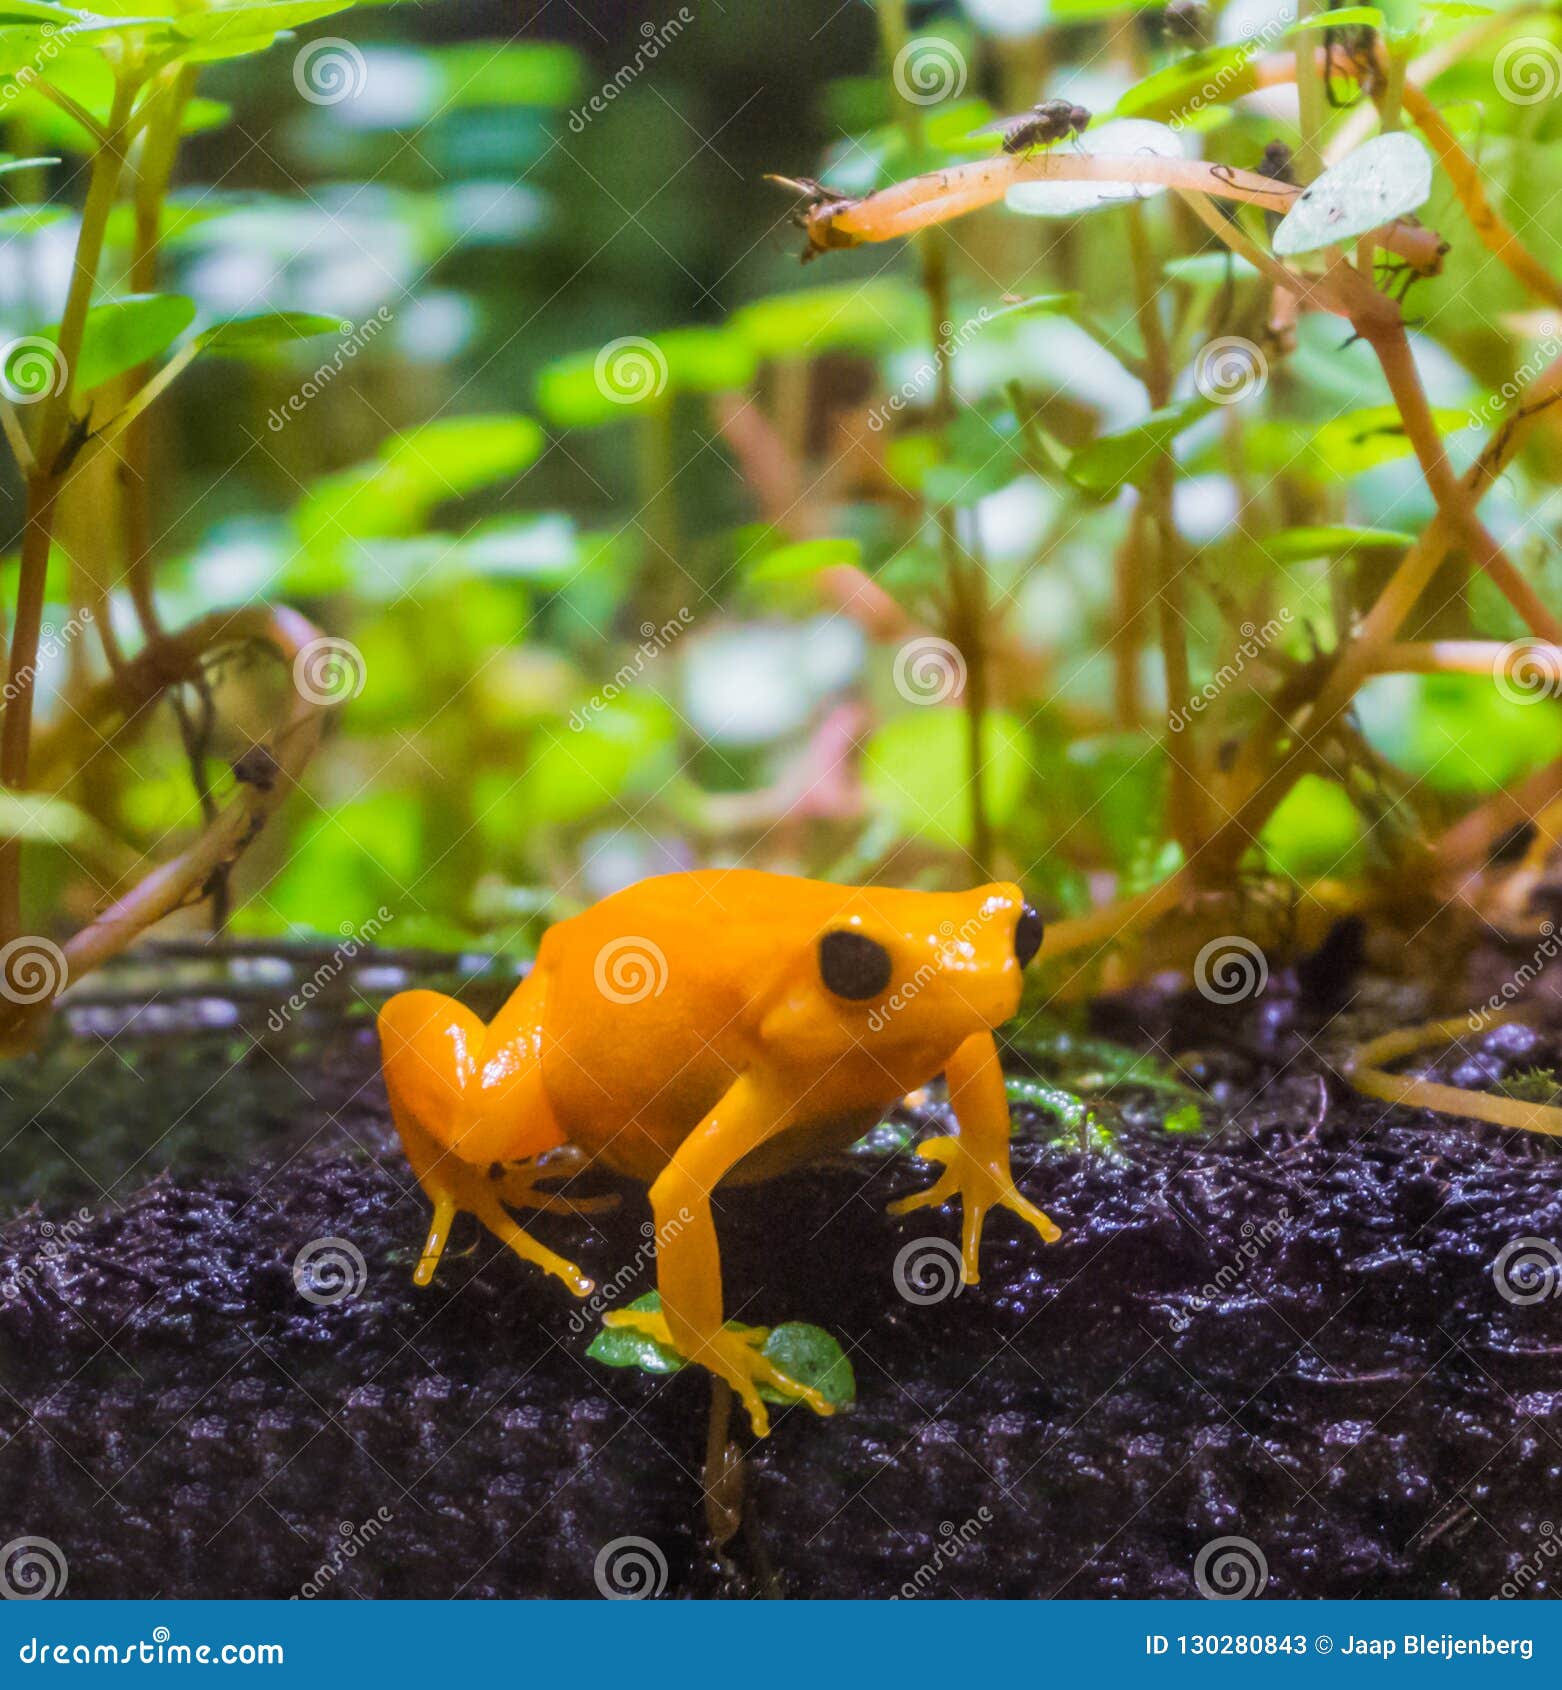 Yellow Poison Dart Frog a Small Poisonous Frog from Macro Closeup Stock Image - of dendrobatidae, color: 130280843